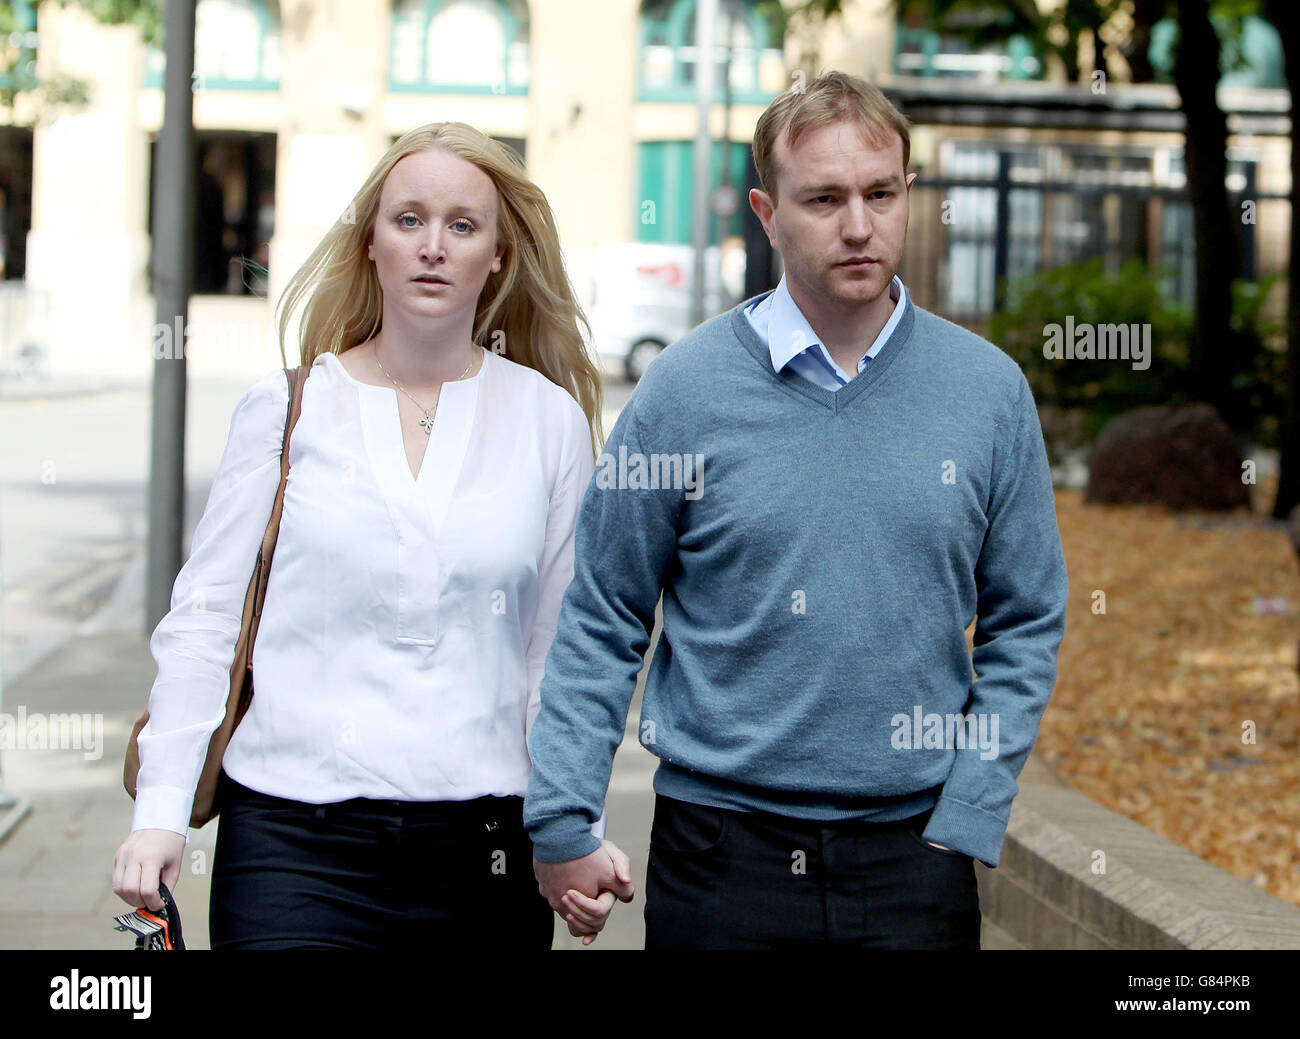 Trader Tom Hayes and his wife Sarah arriving at Southwark Crown Court, in London, where he stands accused of rigging Libor interest rates. Picture date: Wednesday July 29, 2015. Hayes, 35, is accused of masterminding a plot with others to manipulate the rate which affected trillions of dollars worth of financial deals. Photo credit should read: Steve Parsons/PA Wire Stock Photo